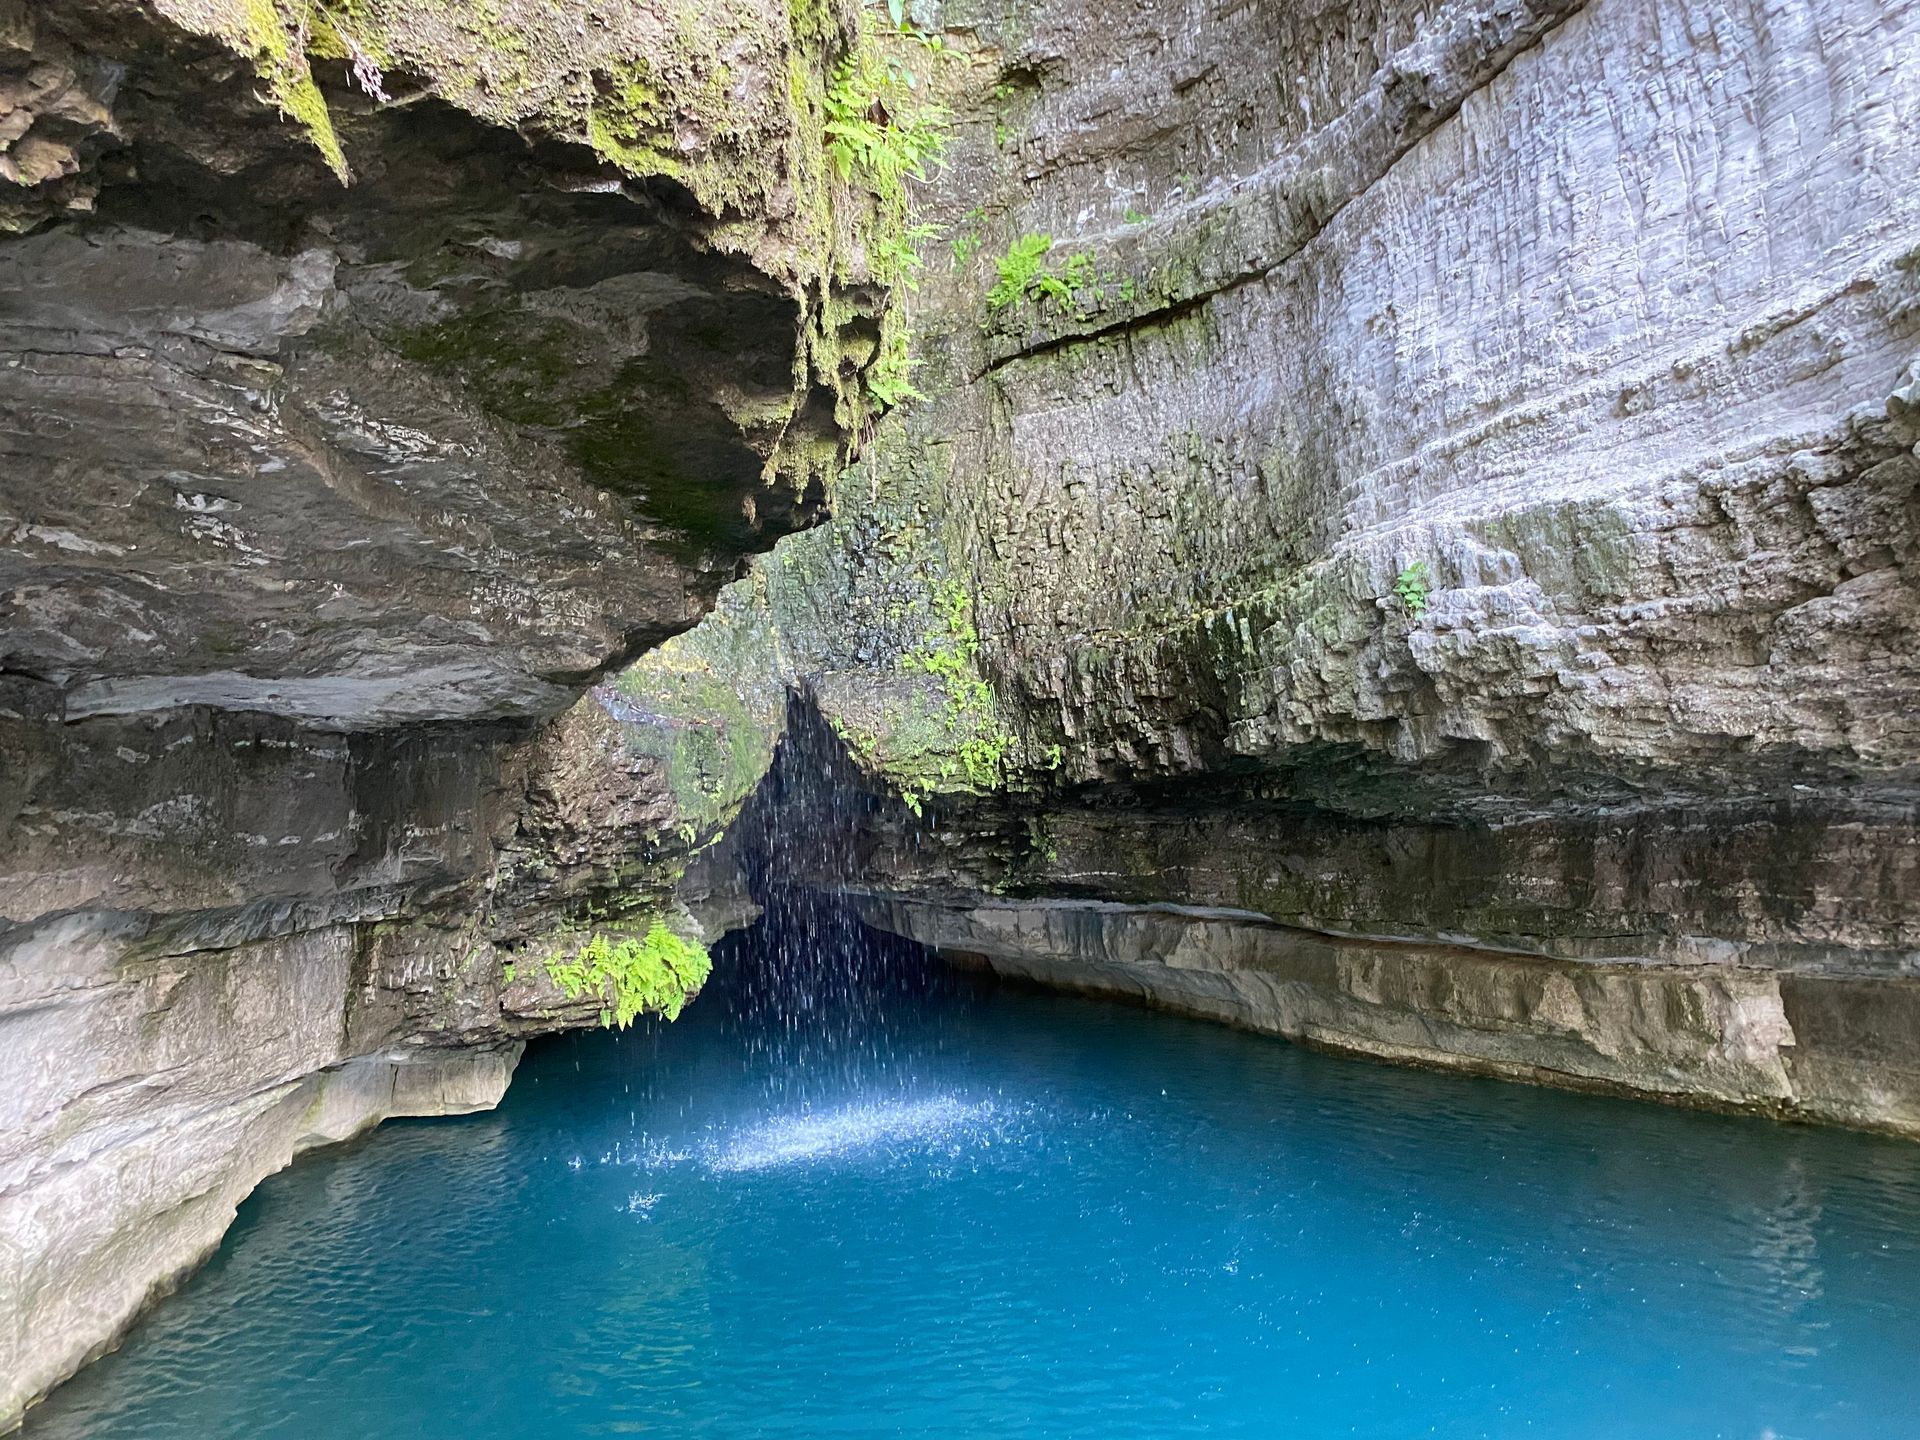 A waterfall is coming out of a cave into a pool of blue water.